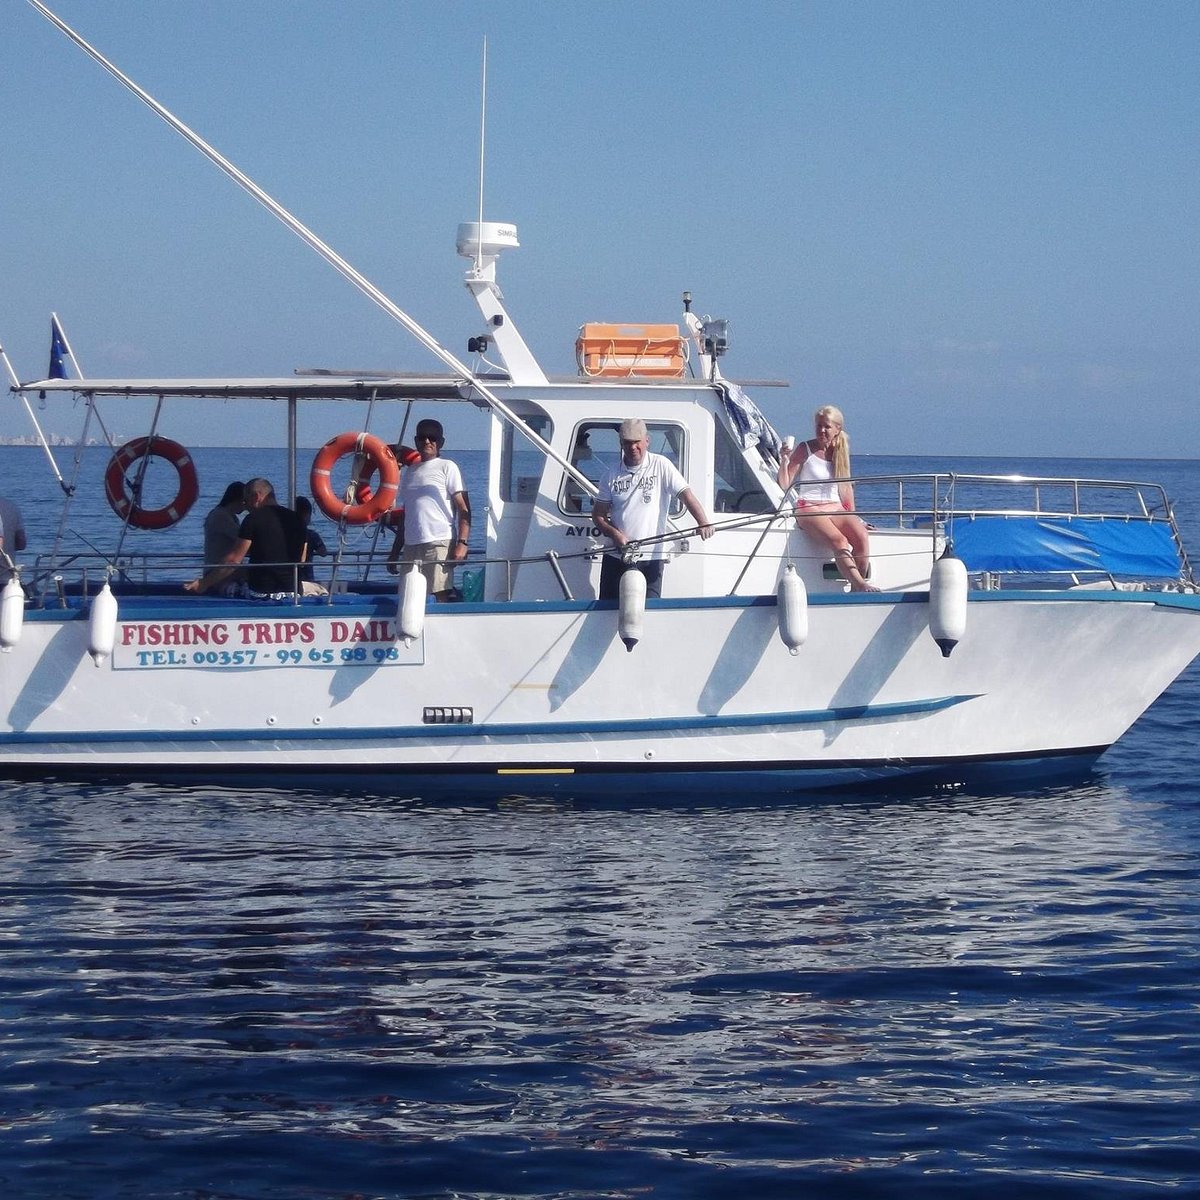 Tuna Fishing Cyprus (Paralimni) - All You Need to Know BEFORE You Go